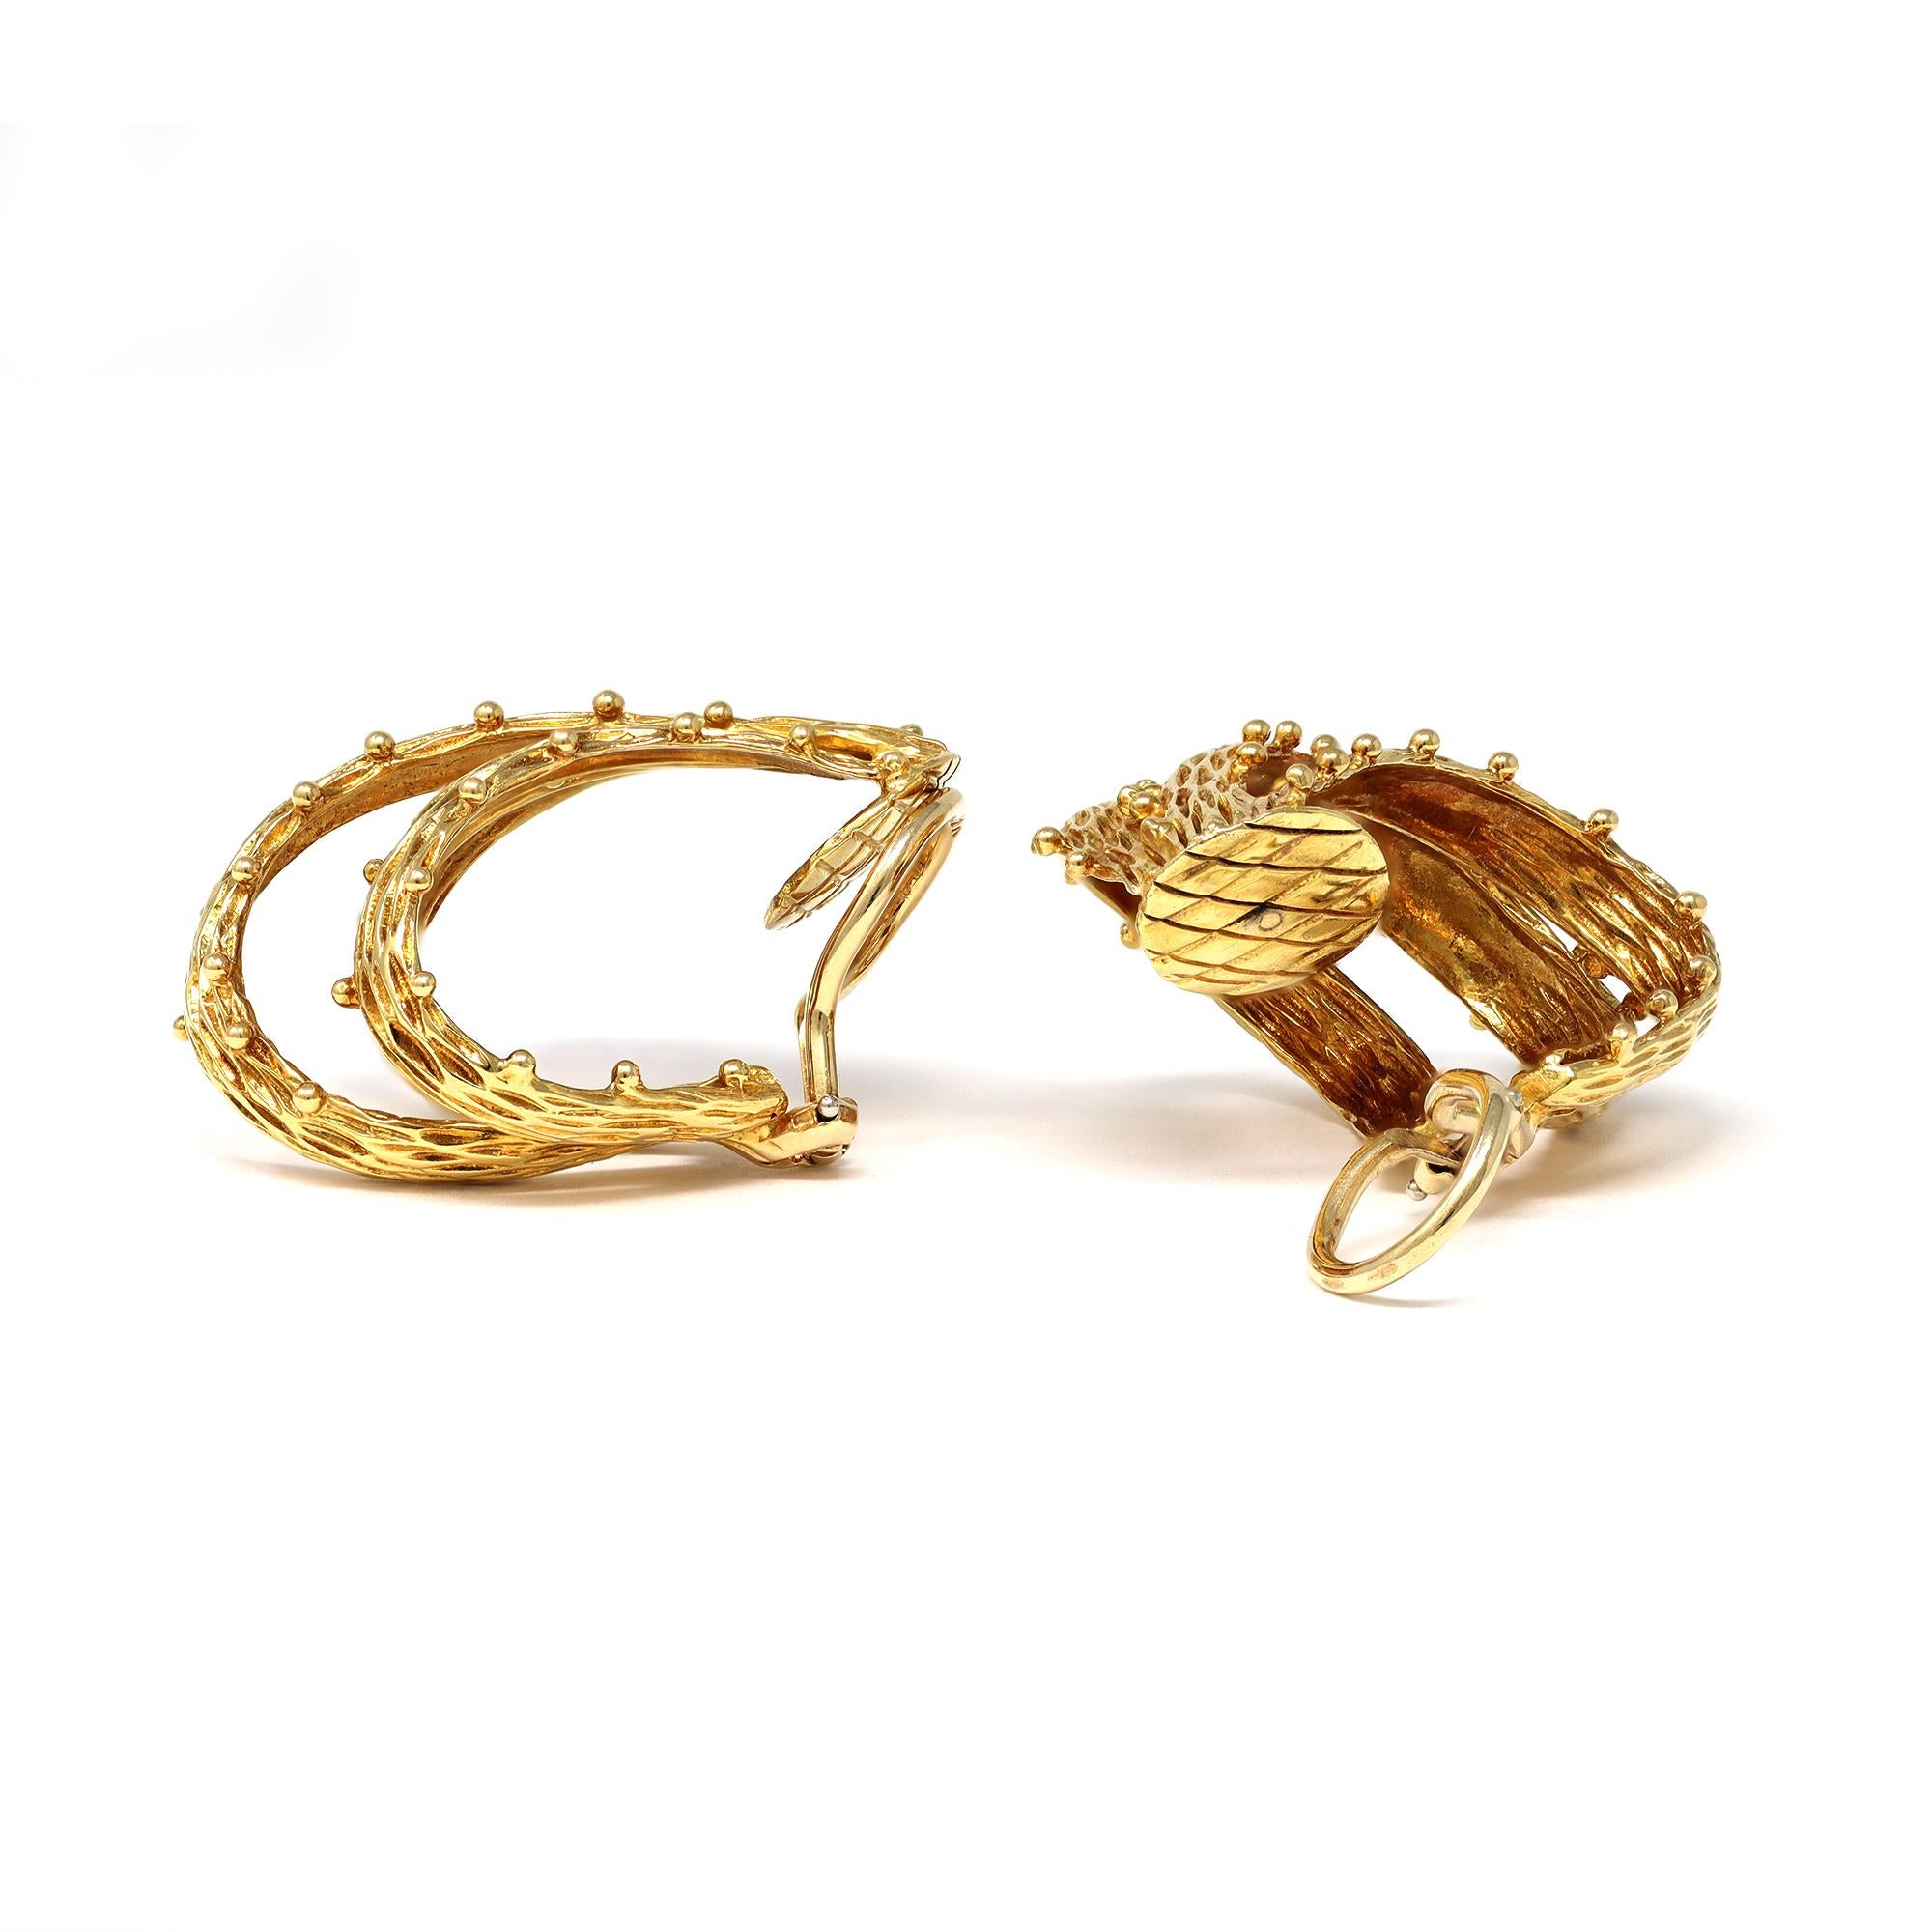 A vintage triple branch hoop clip on earrings circa 1960 featuring an intricate gold work that évoques wood texture. The earrings are particularly flattering because of the scale and the rich yellow gold color. They measure 1.32”long and 1.09” wide.